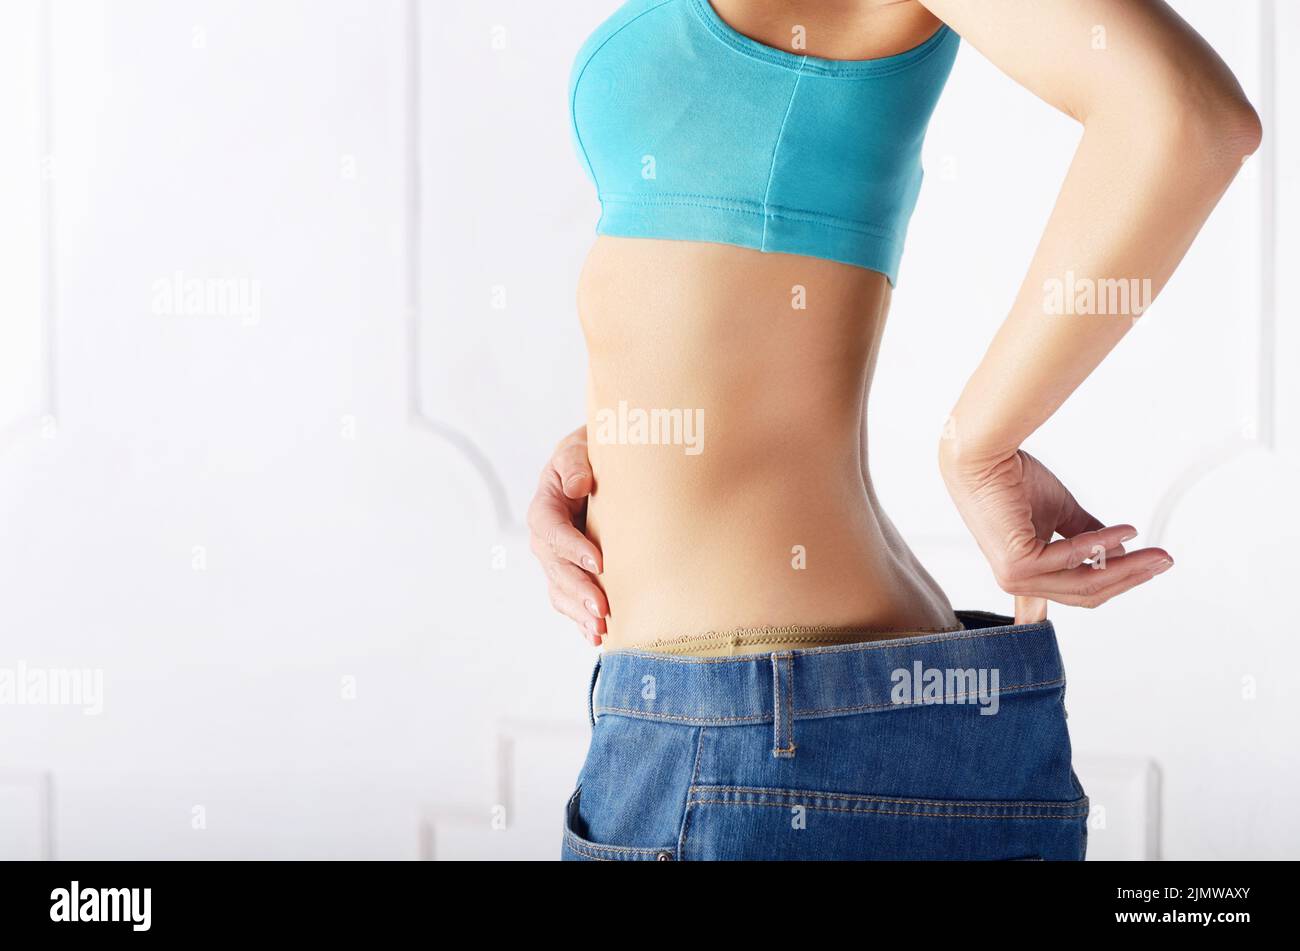 https://c8.alamy.com/comp/2JMWAXY/caucasian-female-model-in-blue-jeans-showing-her-flat-stomach-weightloss-concept-2JMWAXY.jpg